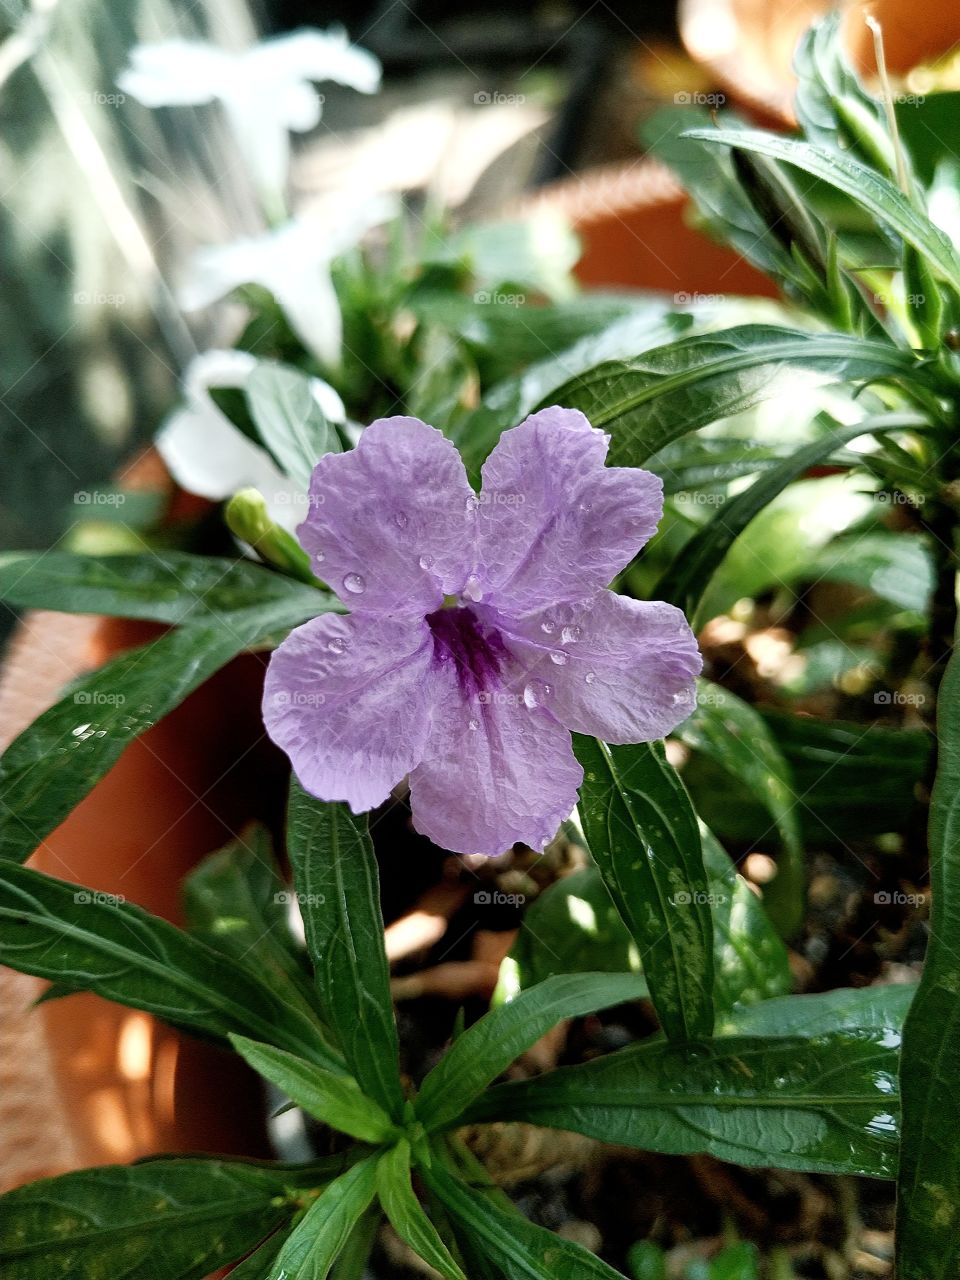 Ruellia is a genus of flowering plantscommonly known as ruellias.
Ruellias are popular ornamental plants. Some are used as medicinal plants, but many are known or suspected to be poisonous.